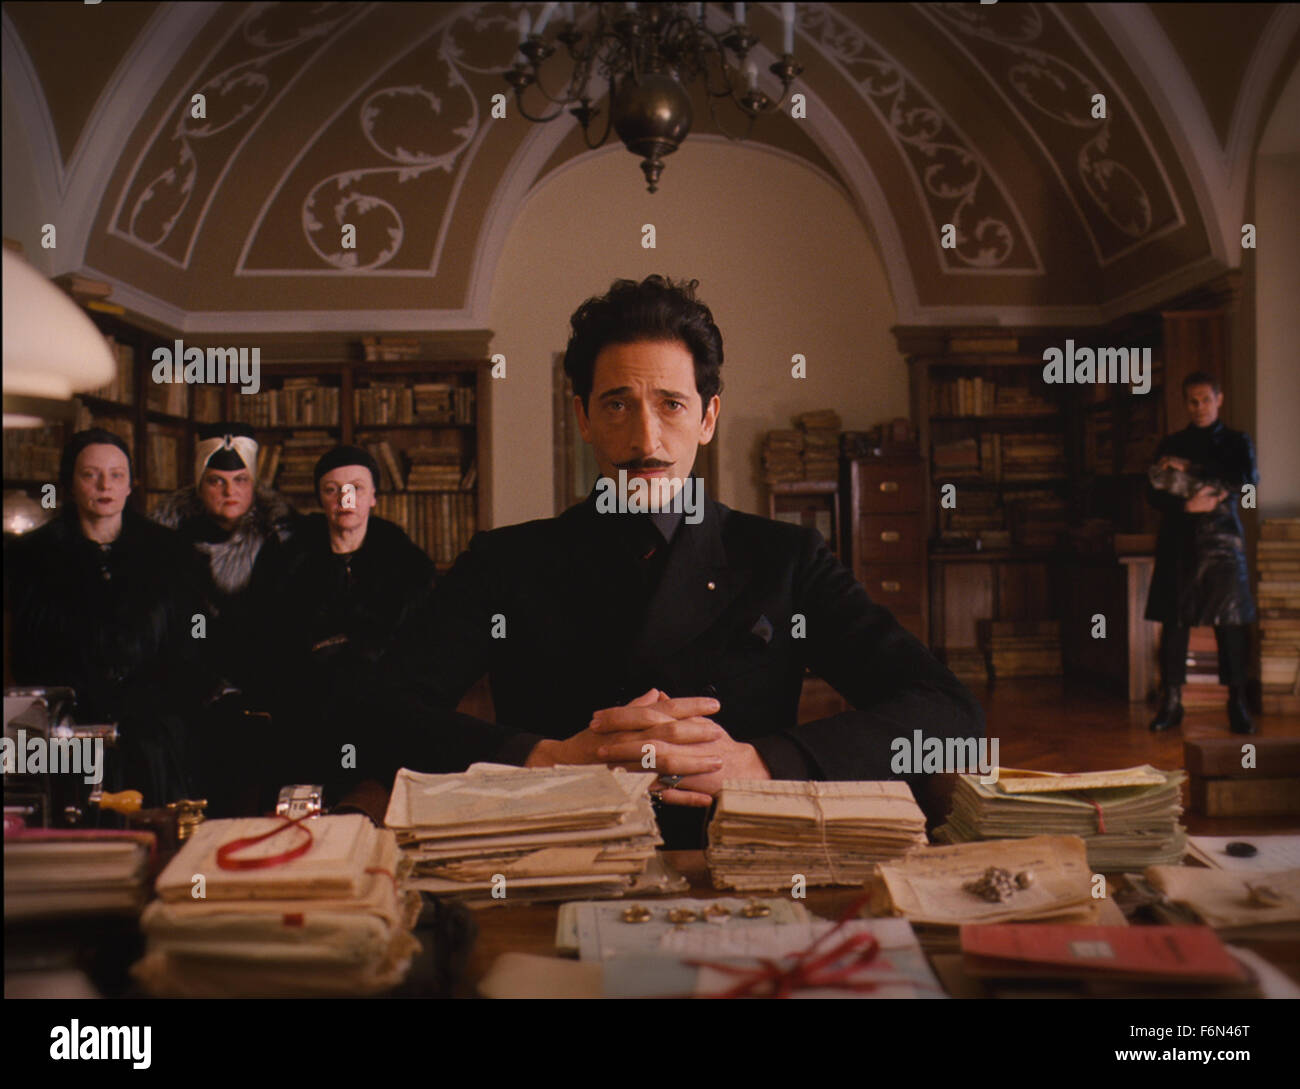 RELEASE DATE: March 7, 2014 TITLE: The Grand Budapest Hotel STUDIO: Fox Searchlight Pictures DIRECTOR: Wes Anderson PLOT: The adventures of Gustave H, a legendary concierge at a famous European hotel between the wars, and Zero Moustafa, the lobby boy who becomes his most trusted friend PICTURED: ADRIEN BRODY as Dmitri (Credit: c Fox Searchlight Pictures/Entertainment Pictures) Stock Photo